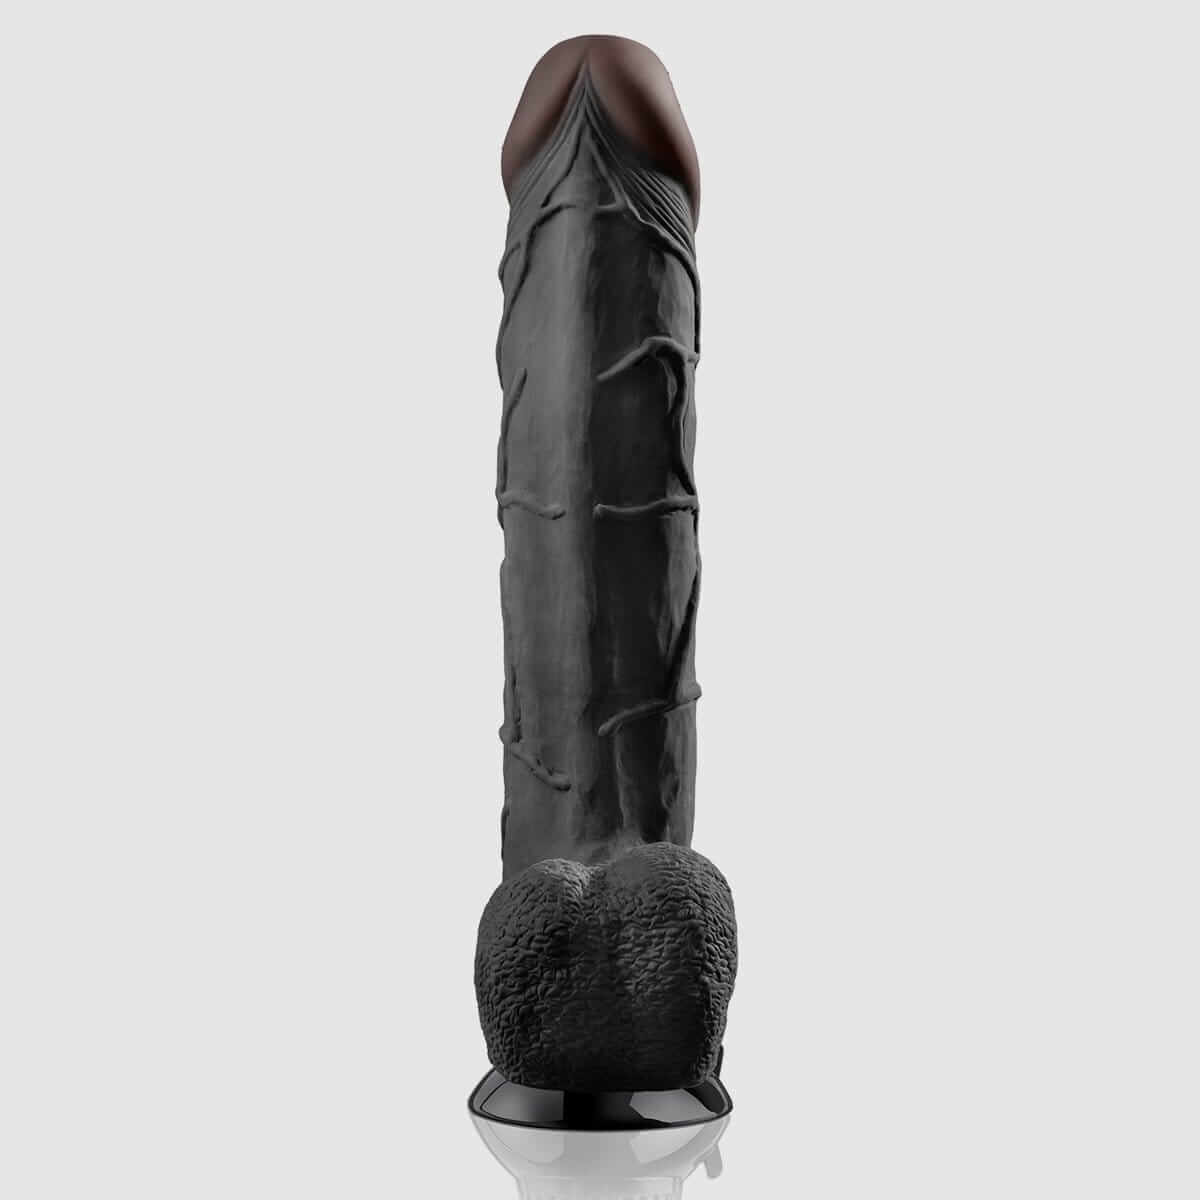 Real Feel Deluxe No.12 - 12" Black Dildo - Thorn & Feather Sex Toy Canada